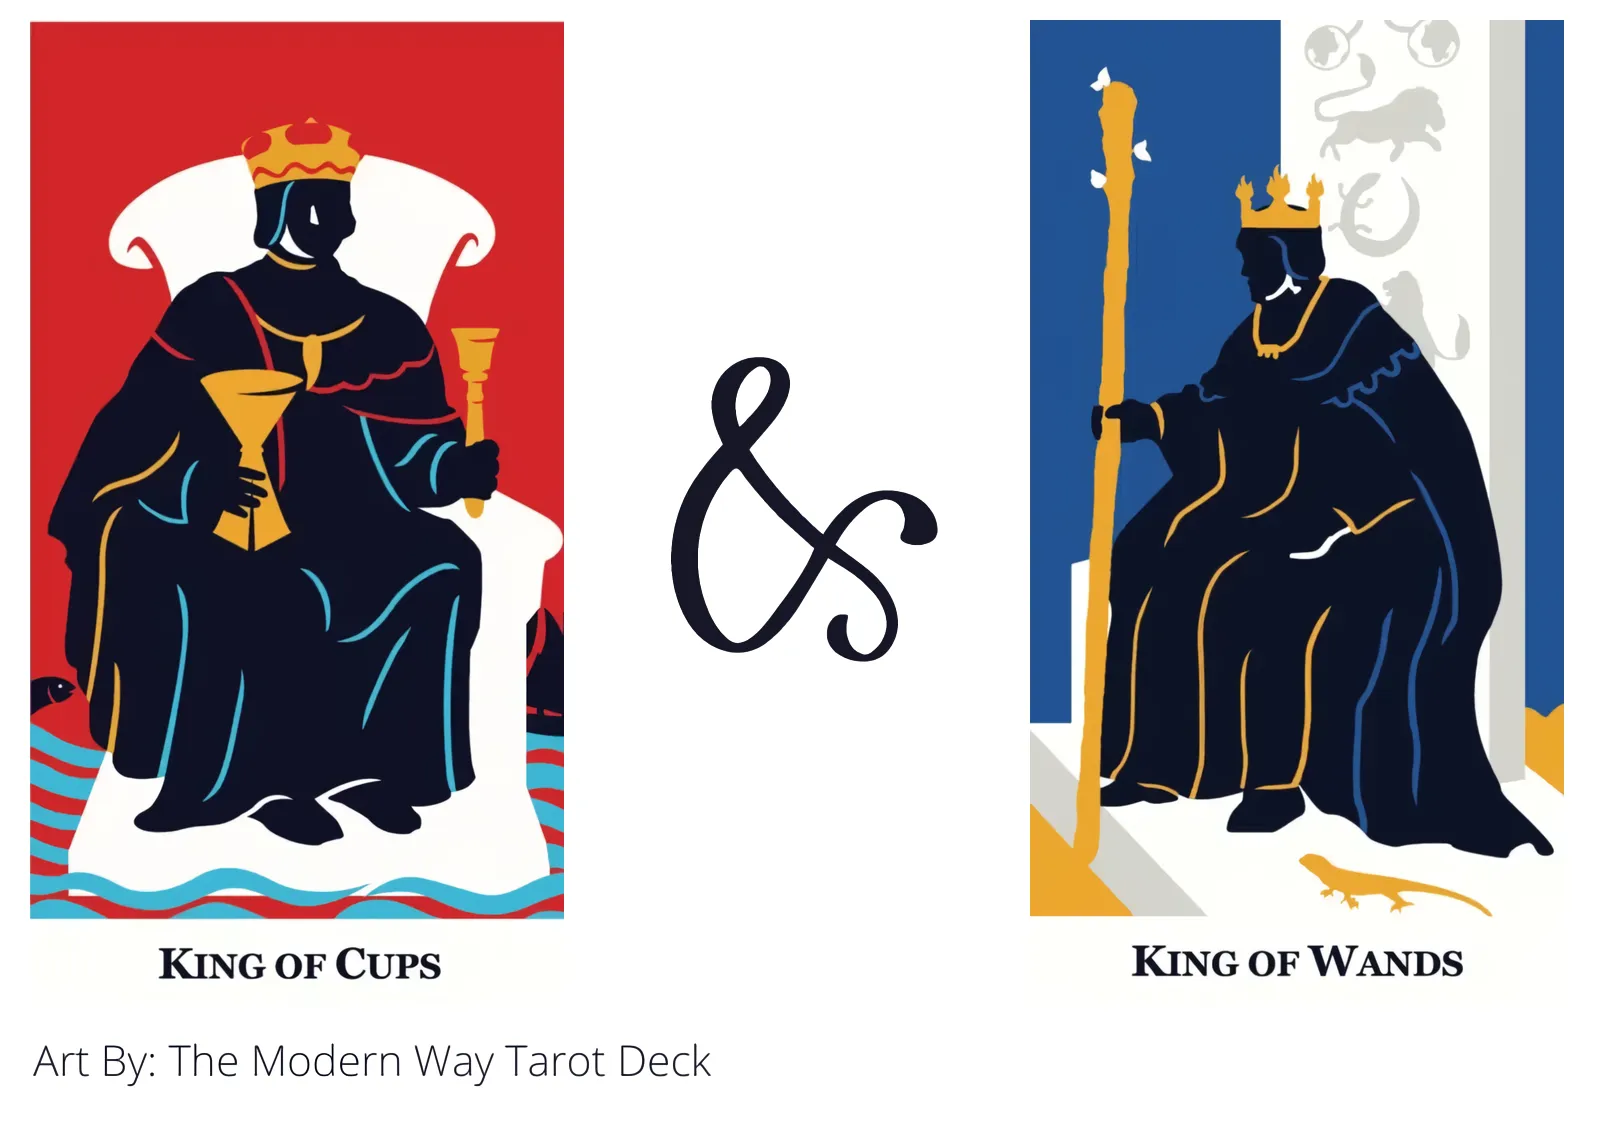 king of cups and king of wands tarot cards together